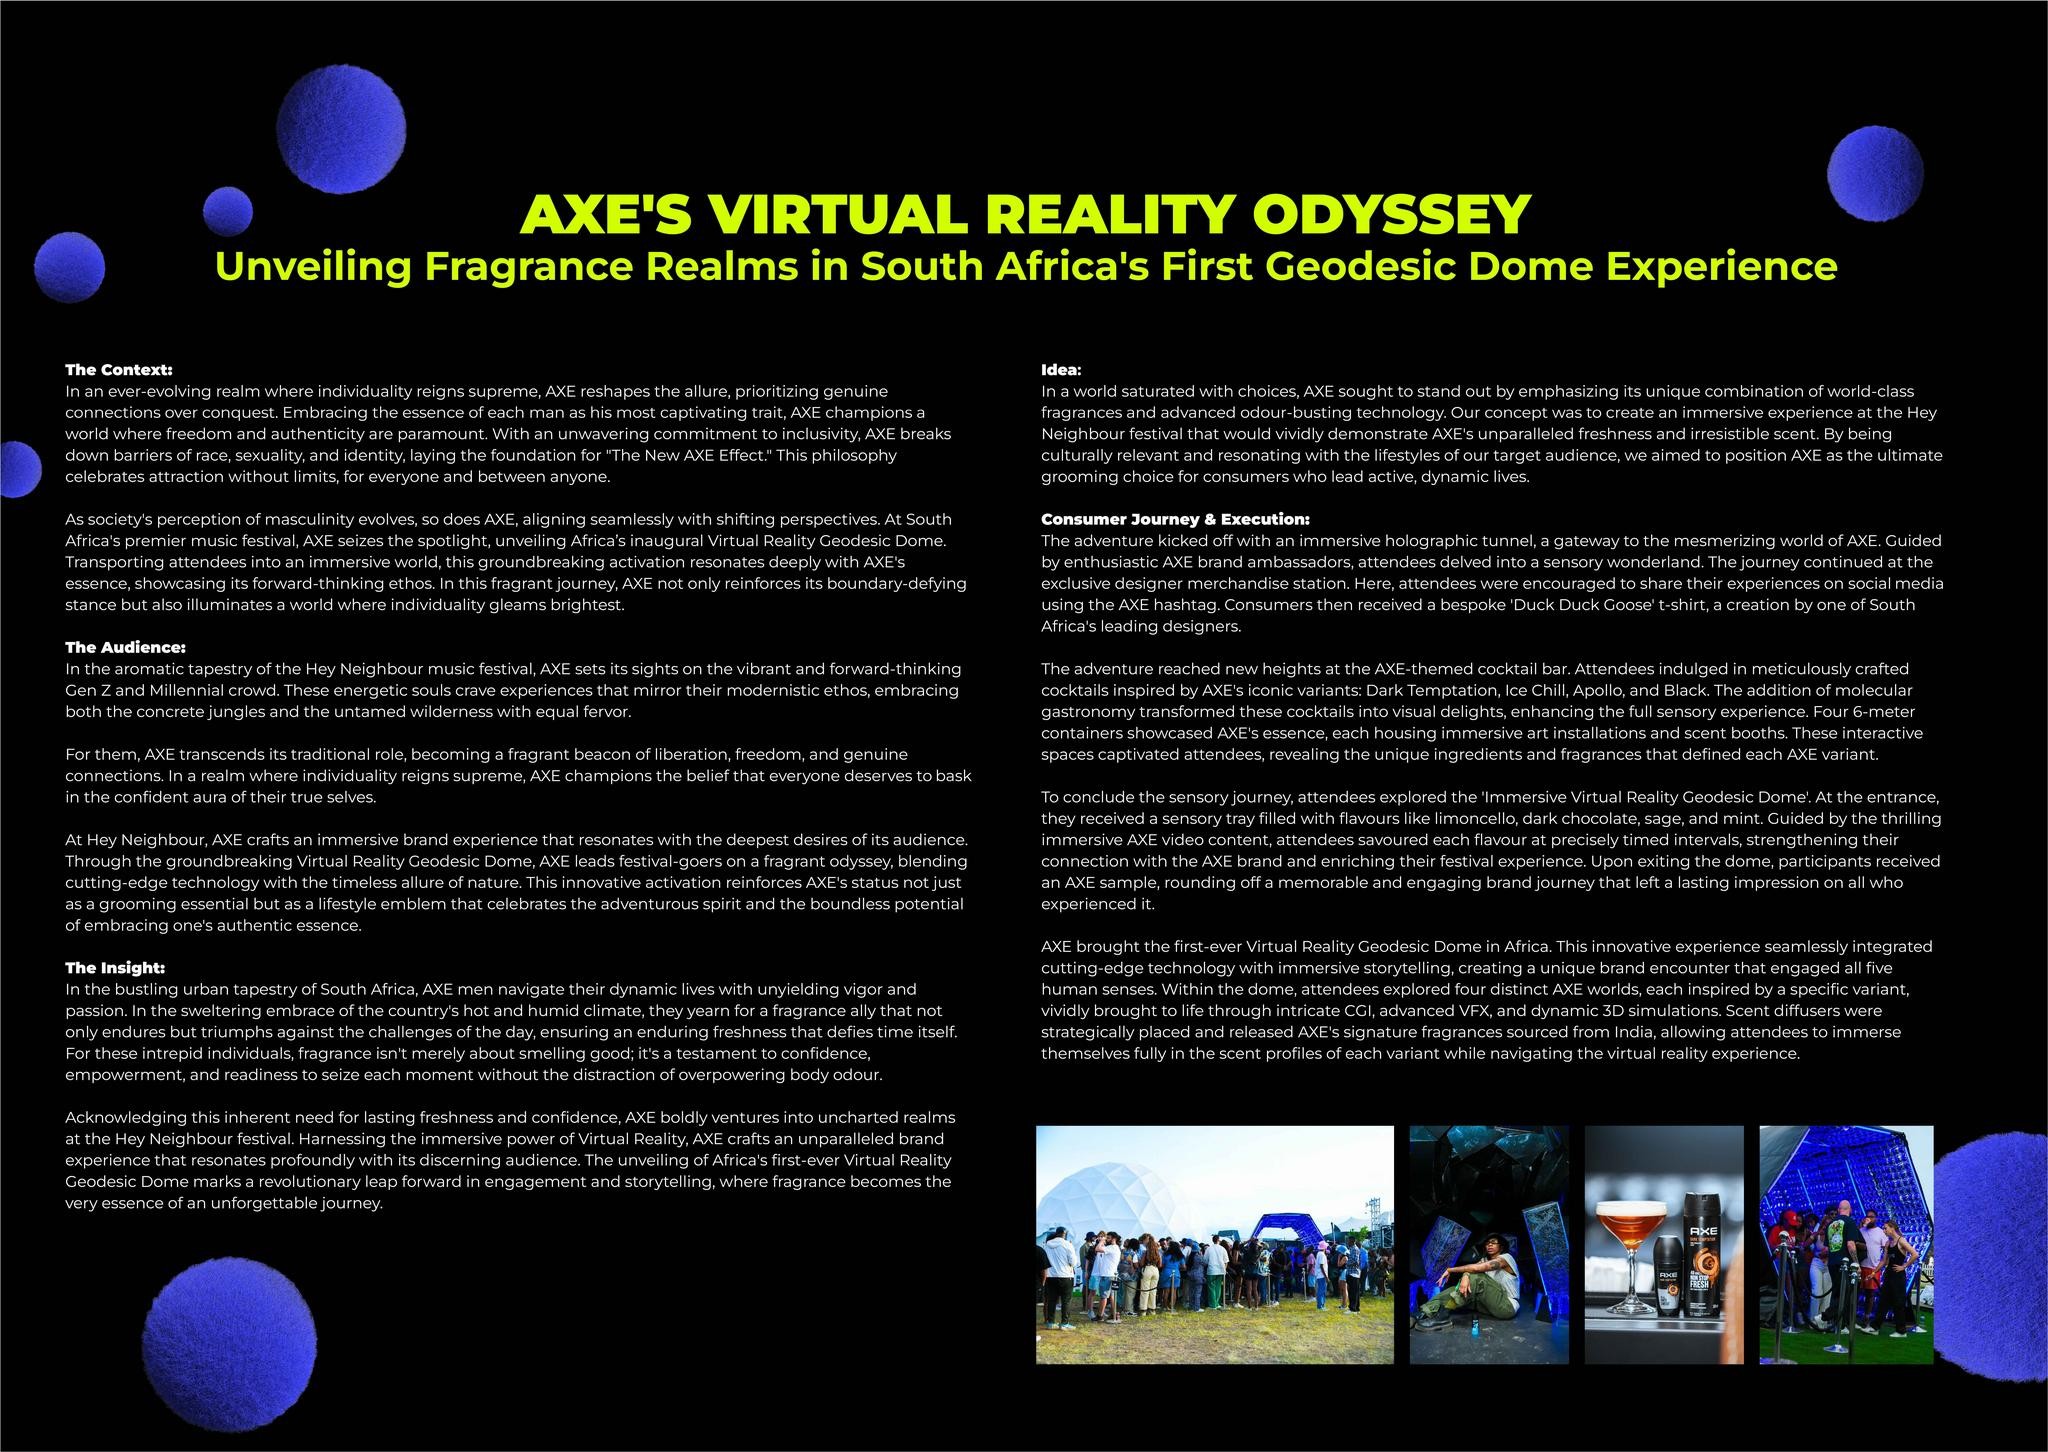 AXE's Virtual Reality Odyssey: Unveiling Fragrance Realms in South Africa's First Geodesic Dome Experience